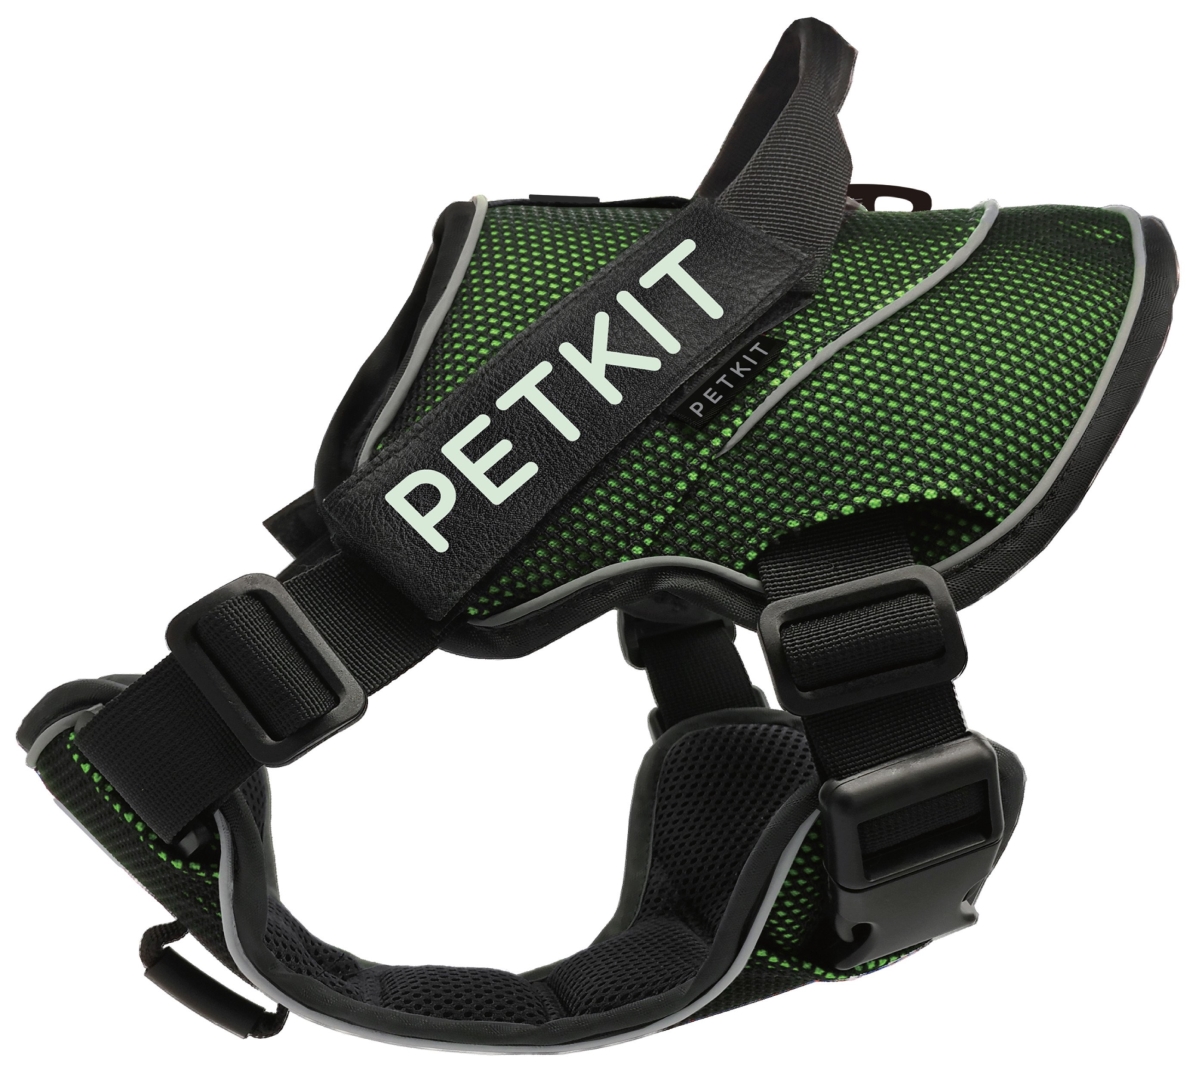 Ha8gnsm Air Quad-connecting Adjustable Cushioned Chest Compression Dog Harness, Green & Black - Small